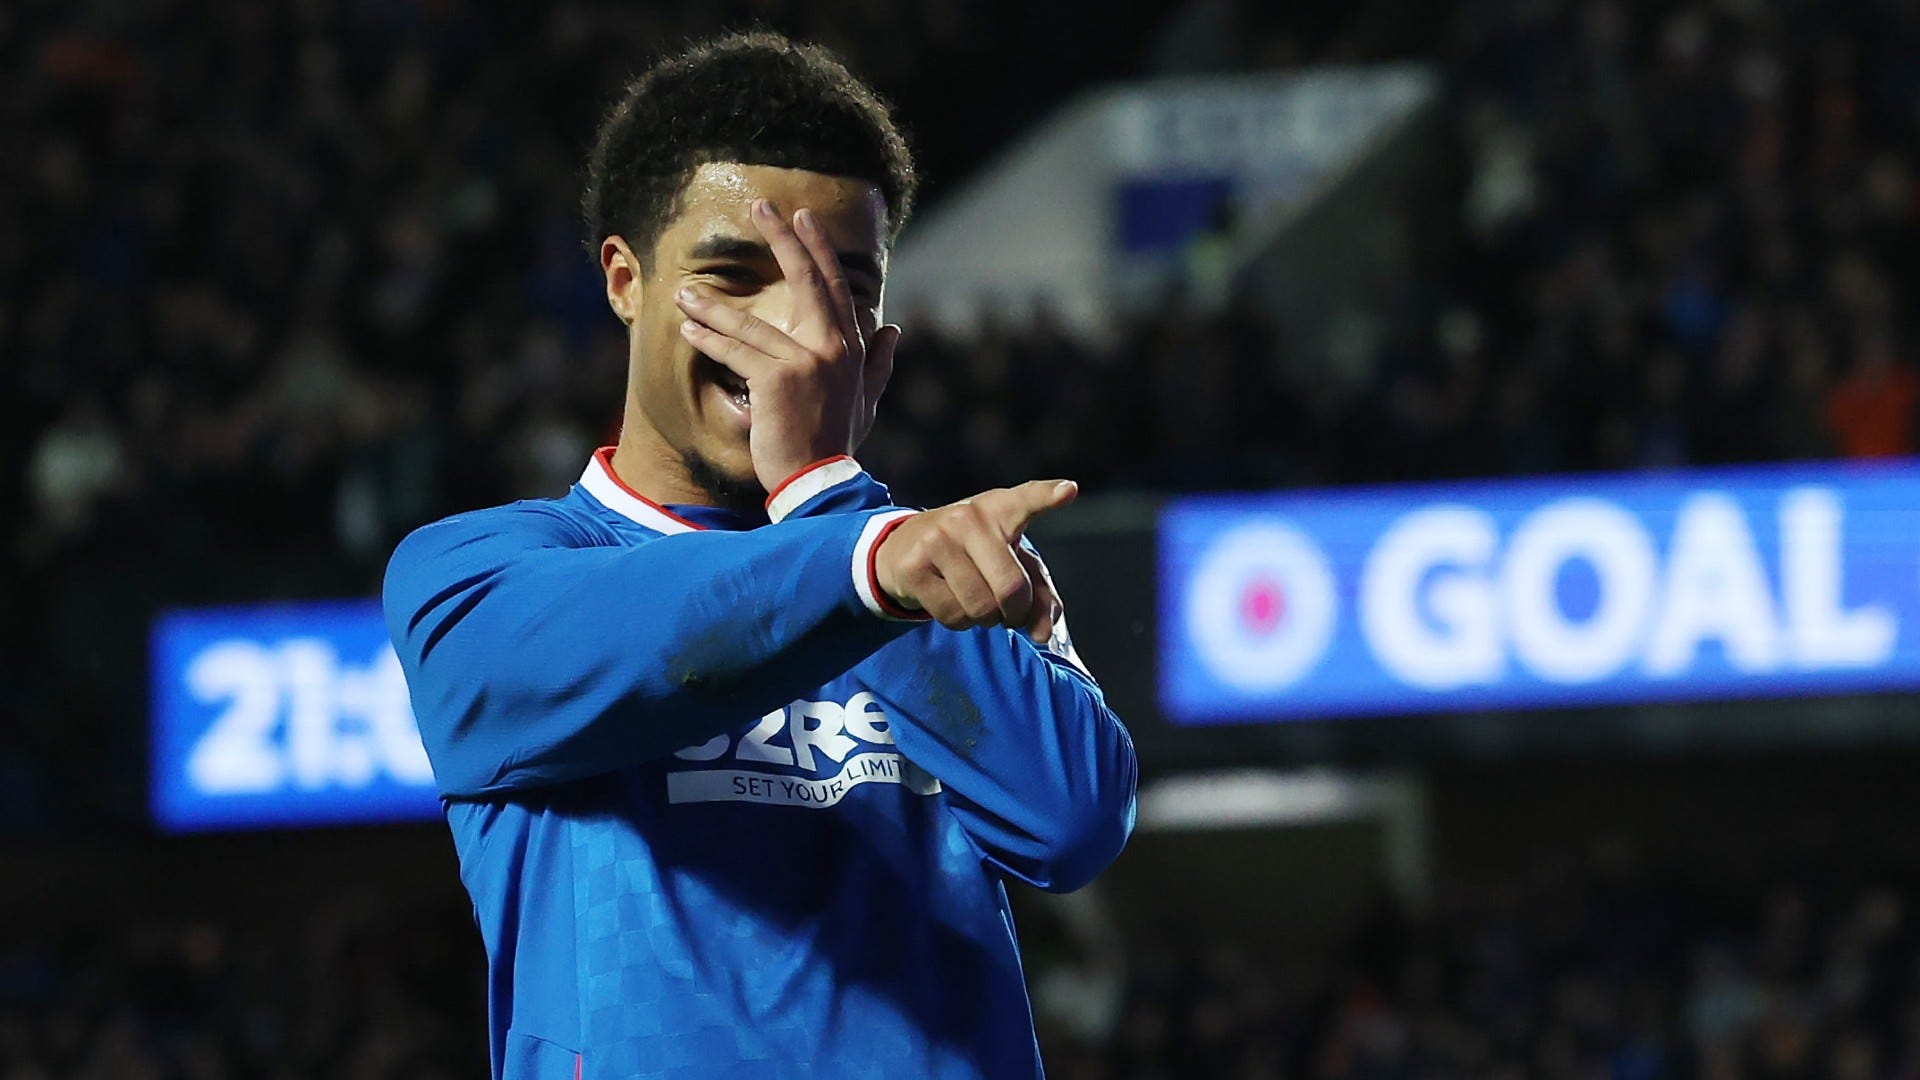 USMNT starlet Tillman is on fire! Midfielder scores again for Rangers to continue incredible loan spell